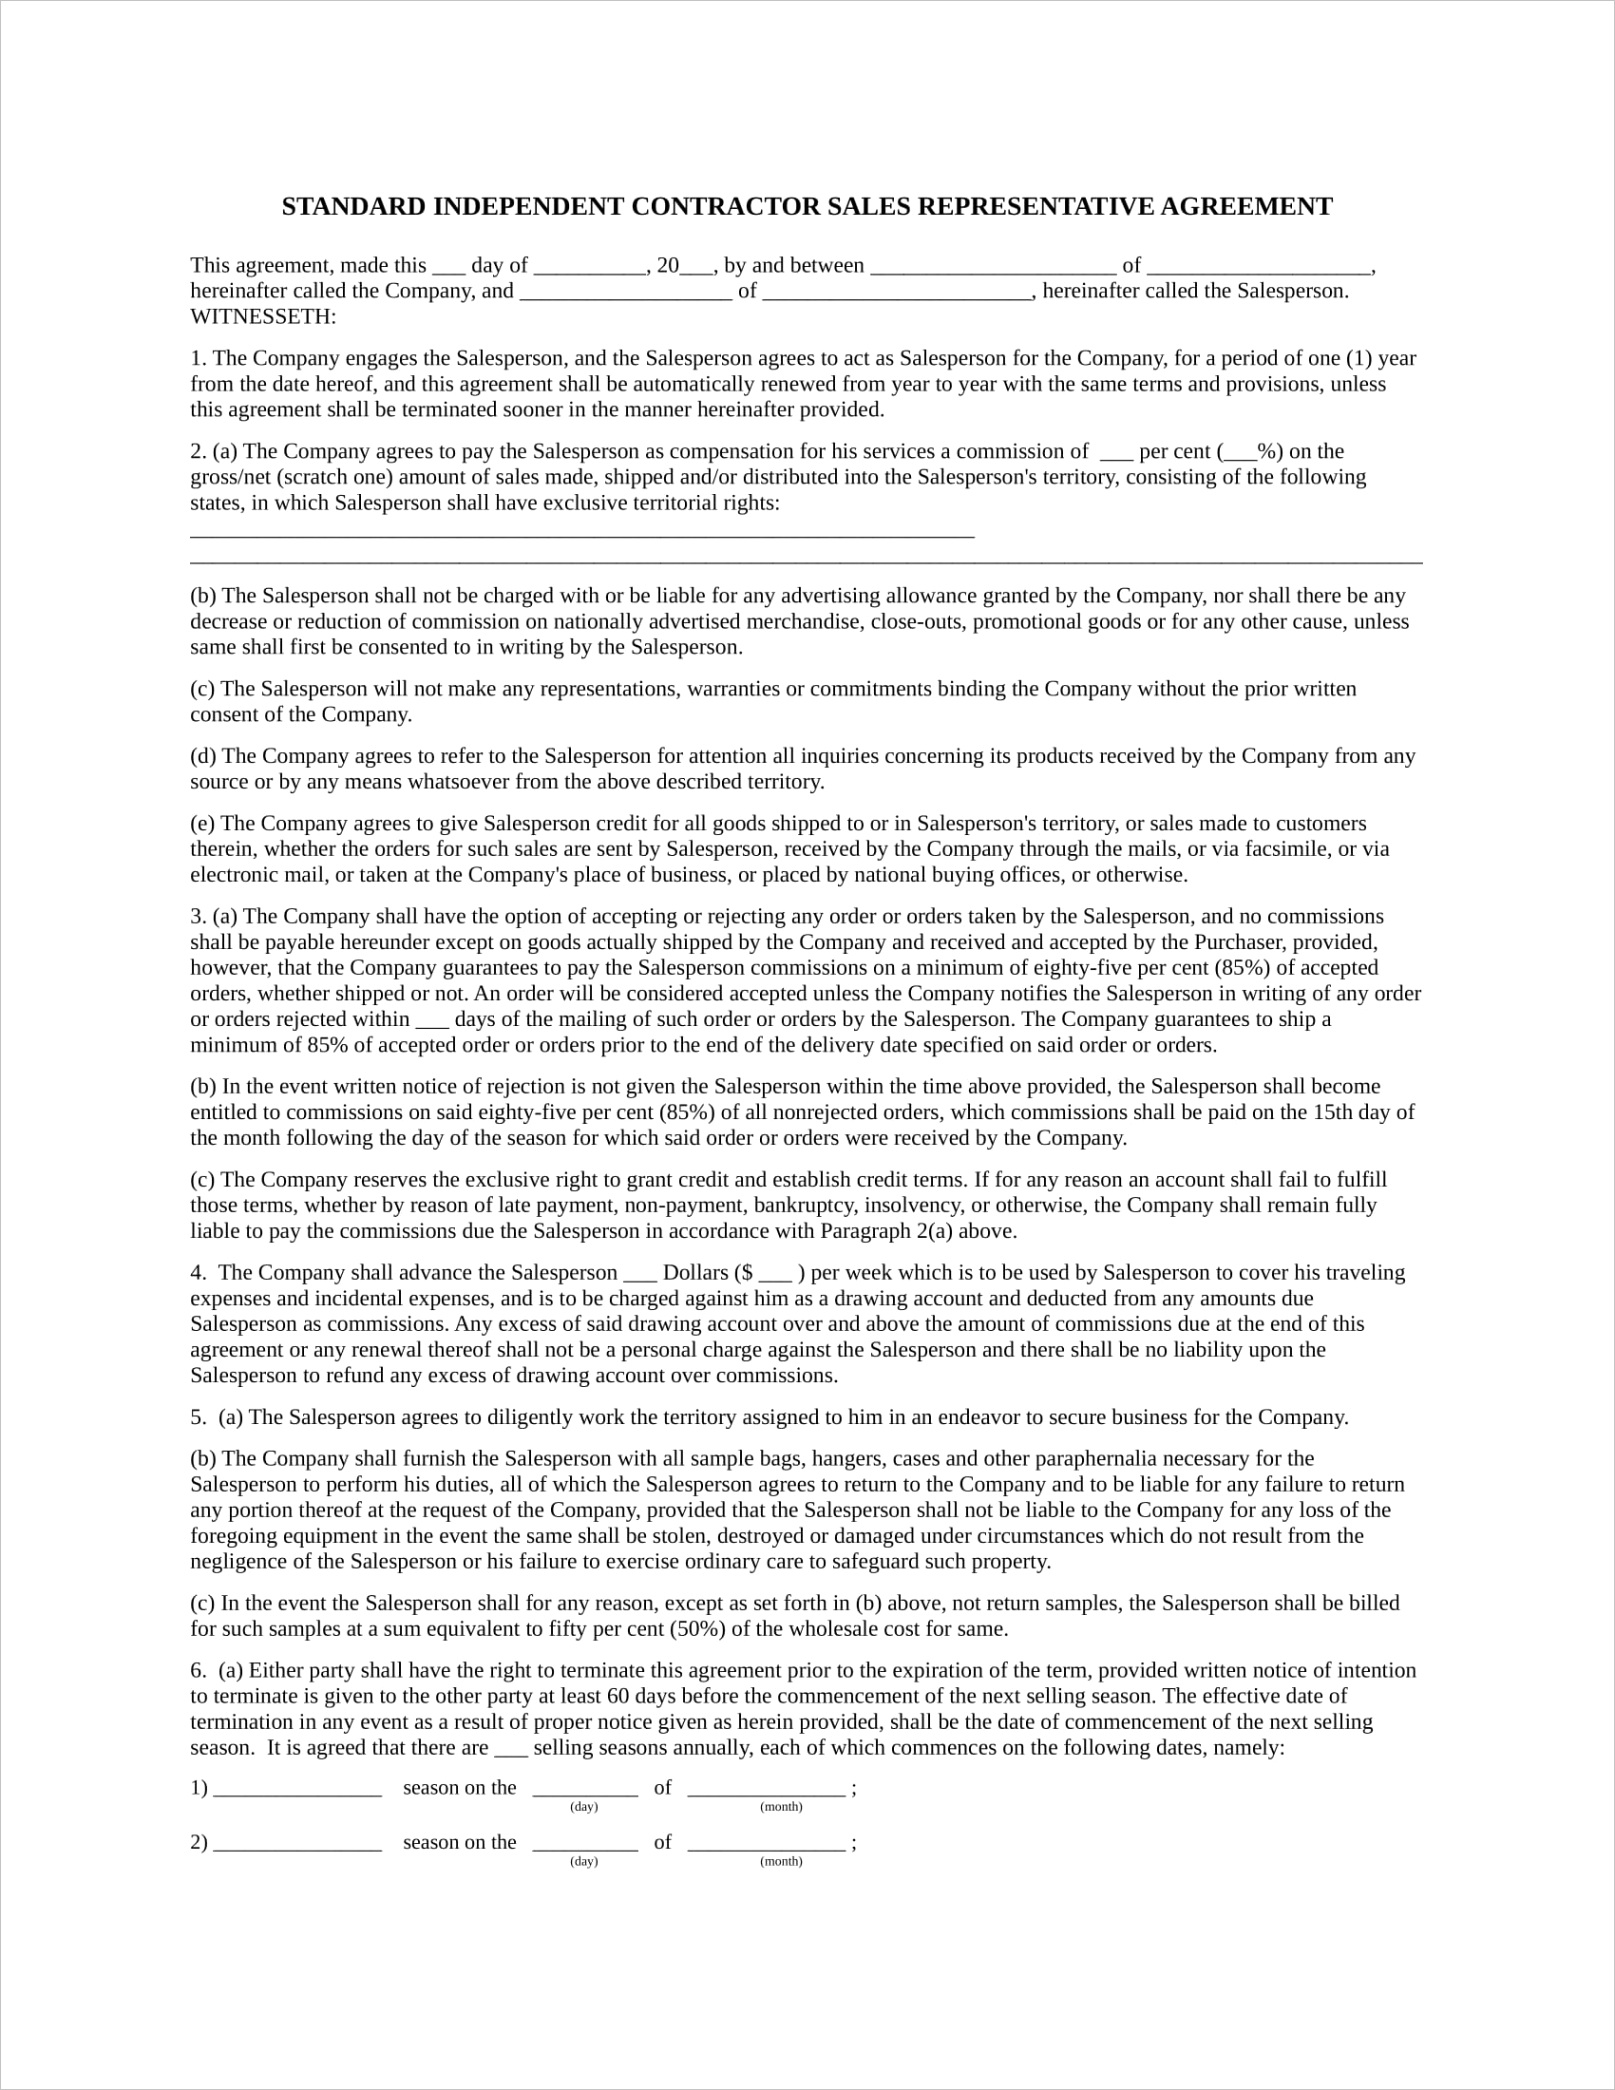 salesperson agreement contract formsml